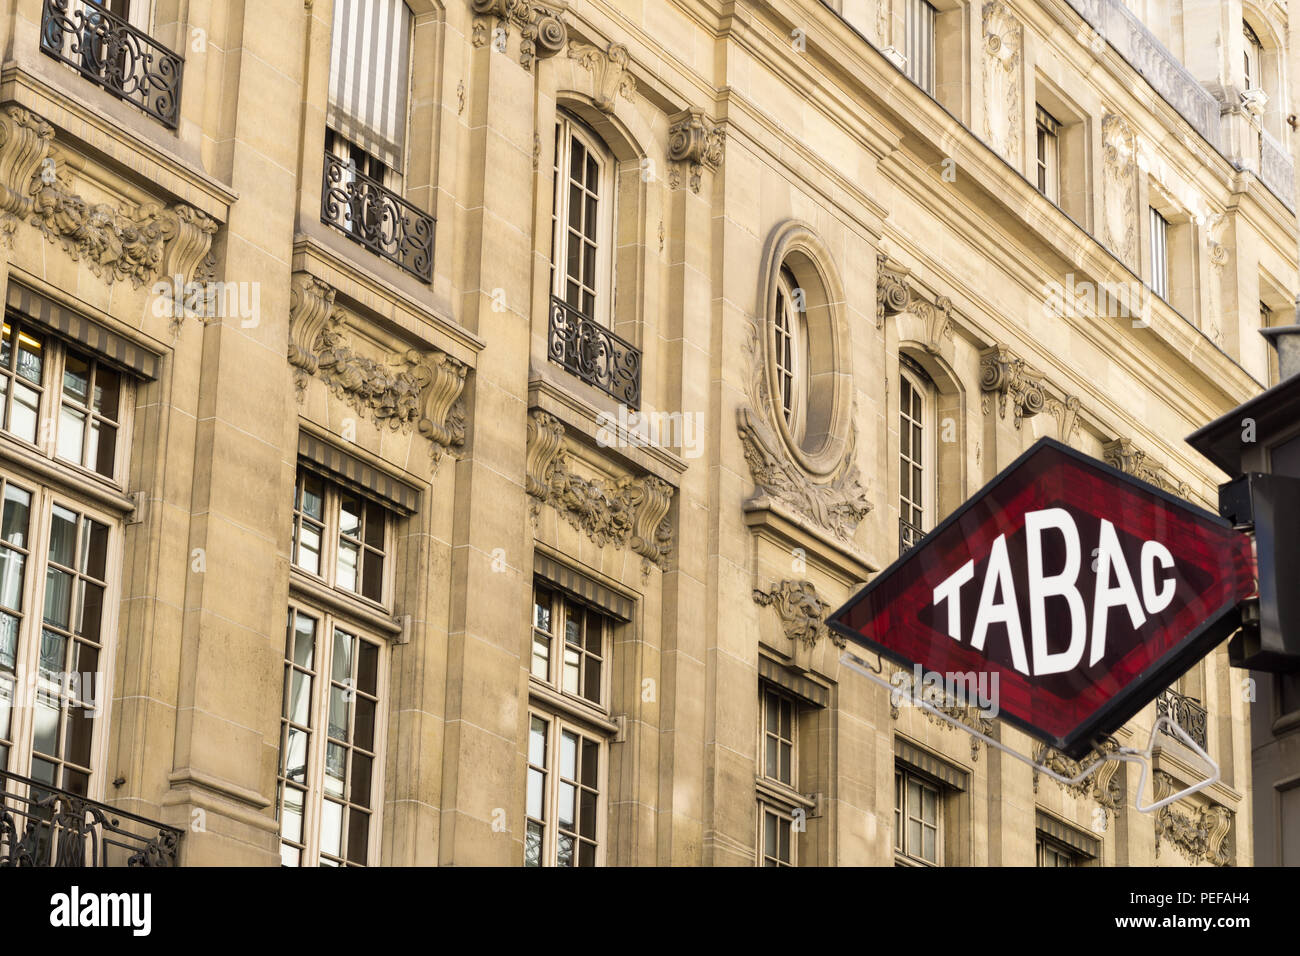 A diamond-shaped Tabac sign indicating a shop selling cigarettes in France. Stock Photo